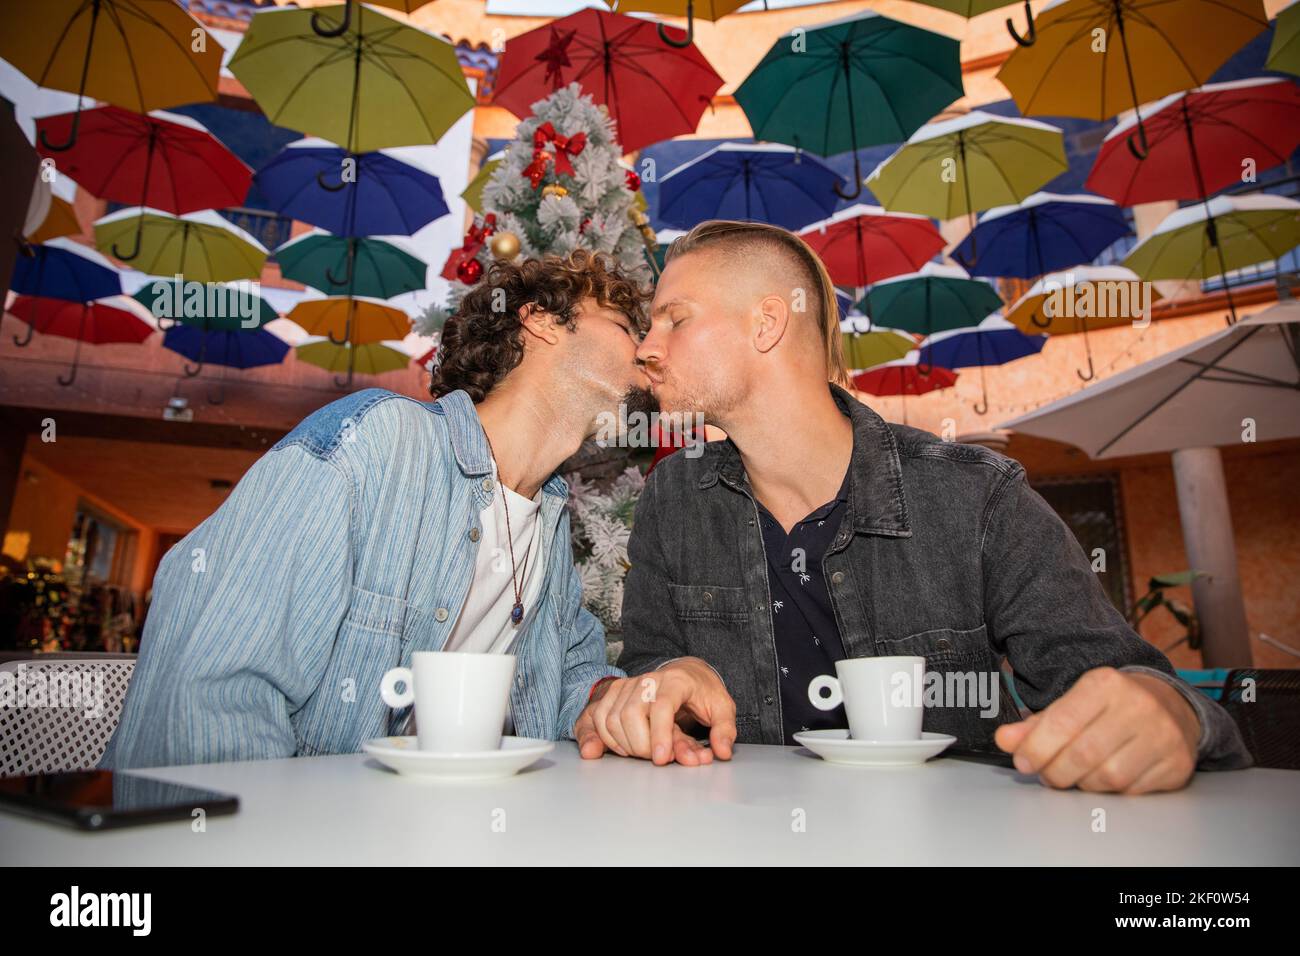 homosexual couple drinks coffee in a cafe during the Christmas holidays. Stock Photo